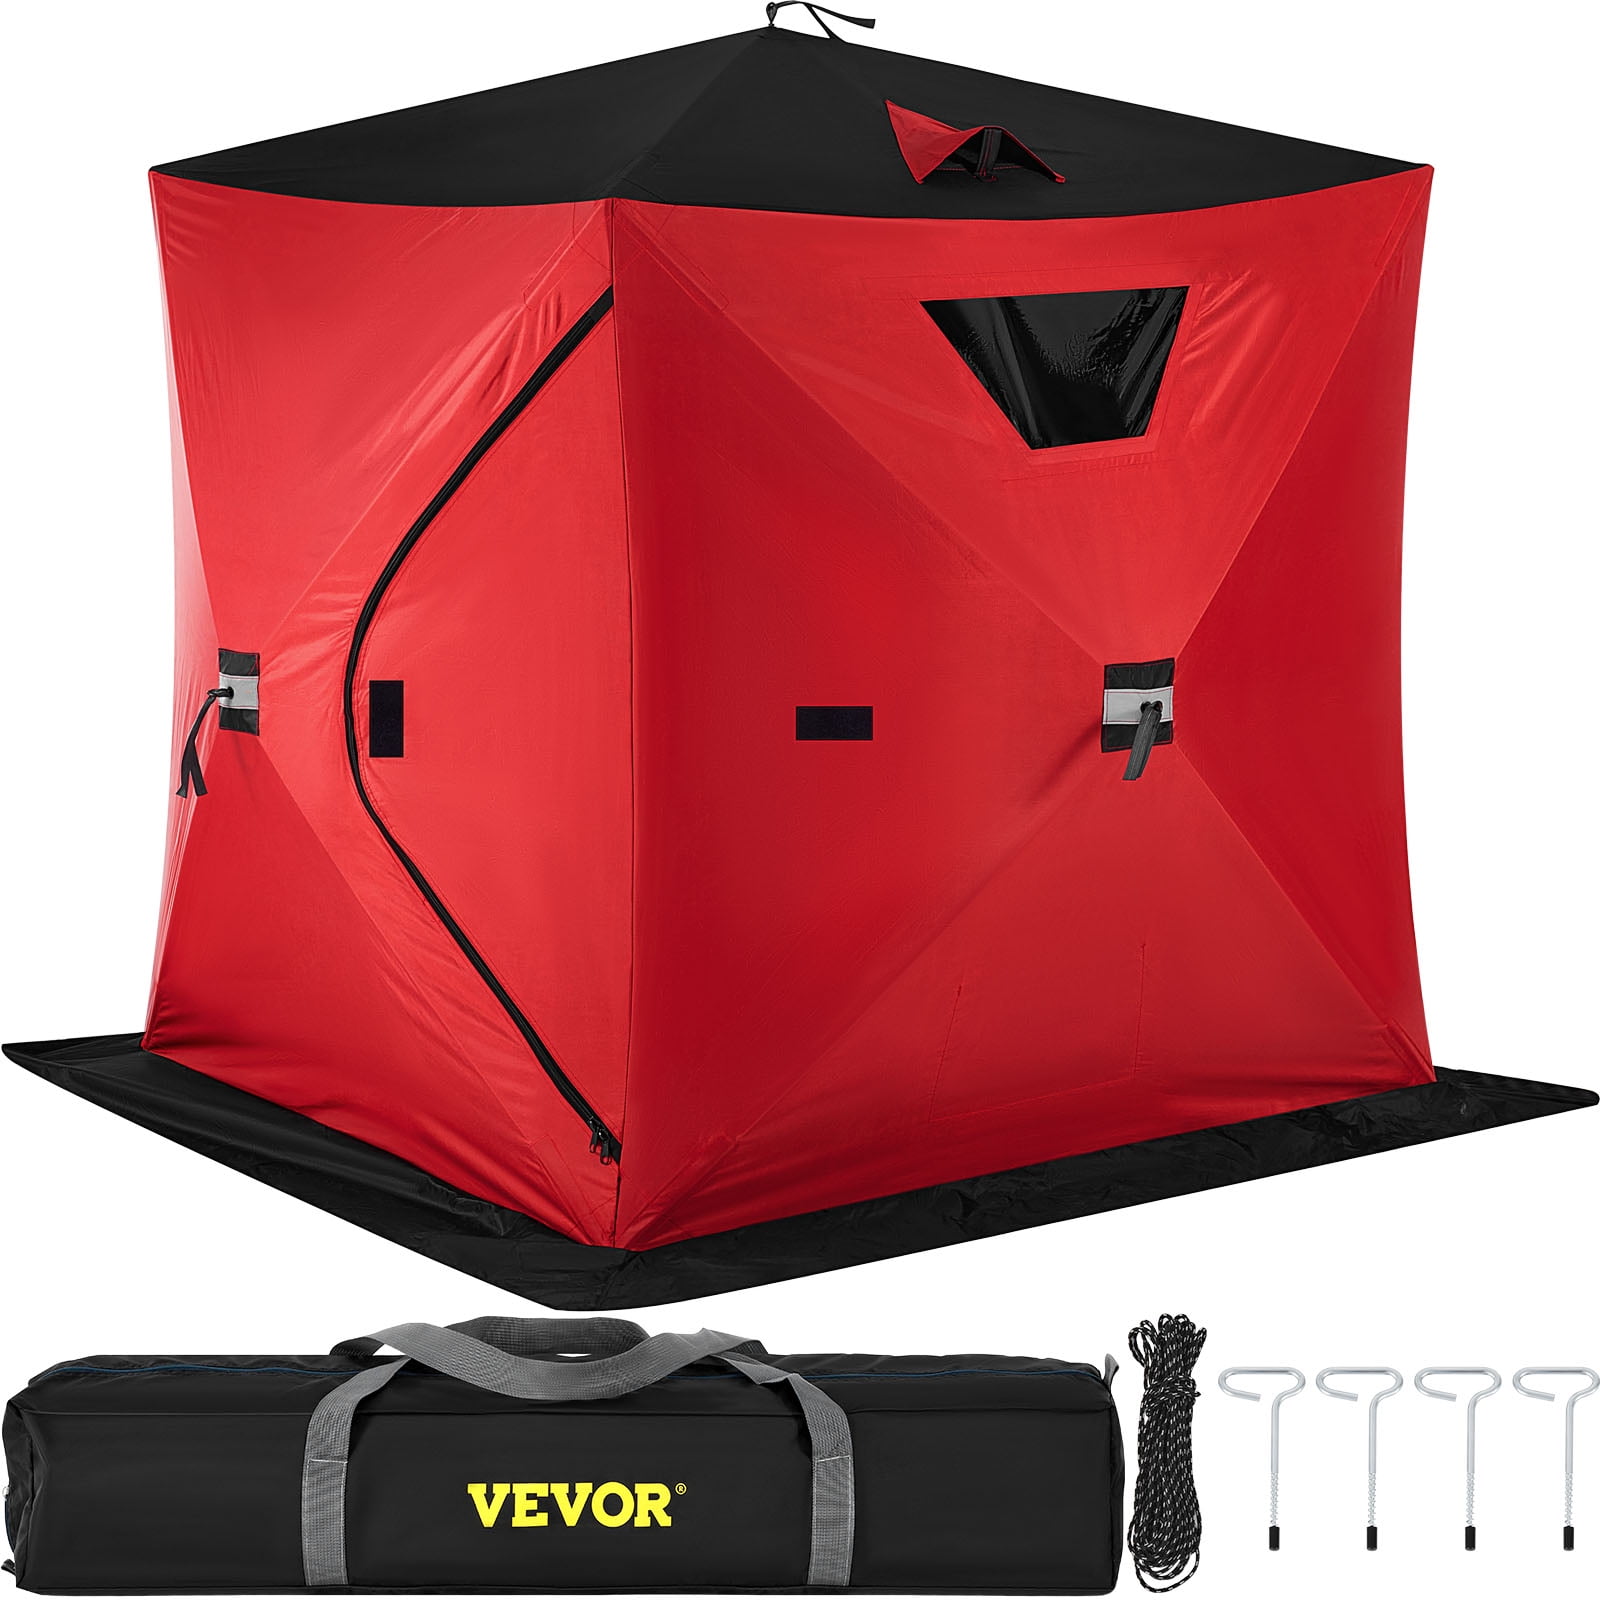 Black Ice Fishing Tent with Waterproof Oxford Fabric 12345 2 Person Ice Fishing Shelter 